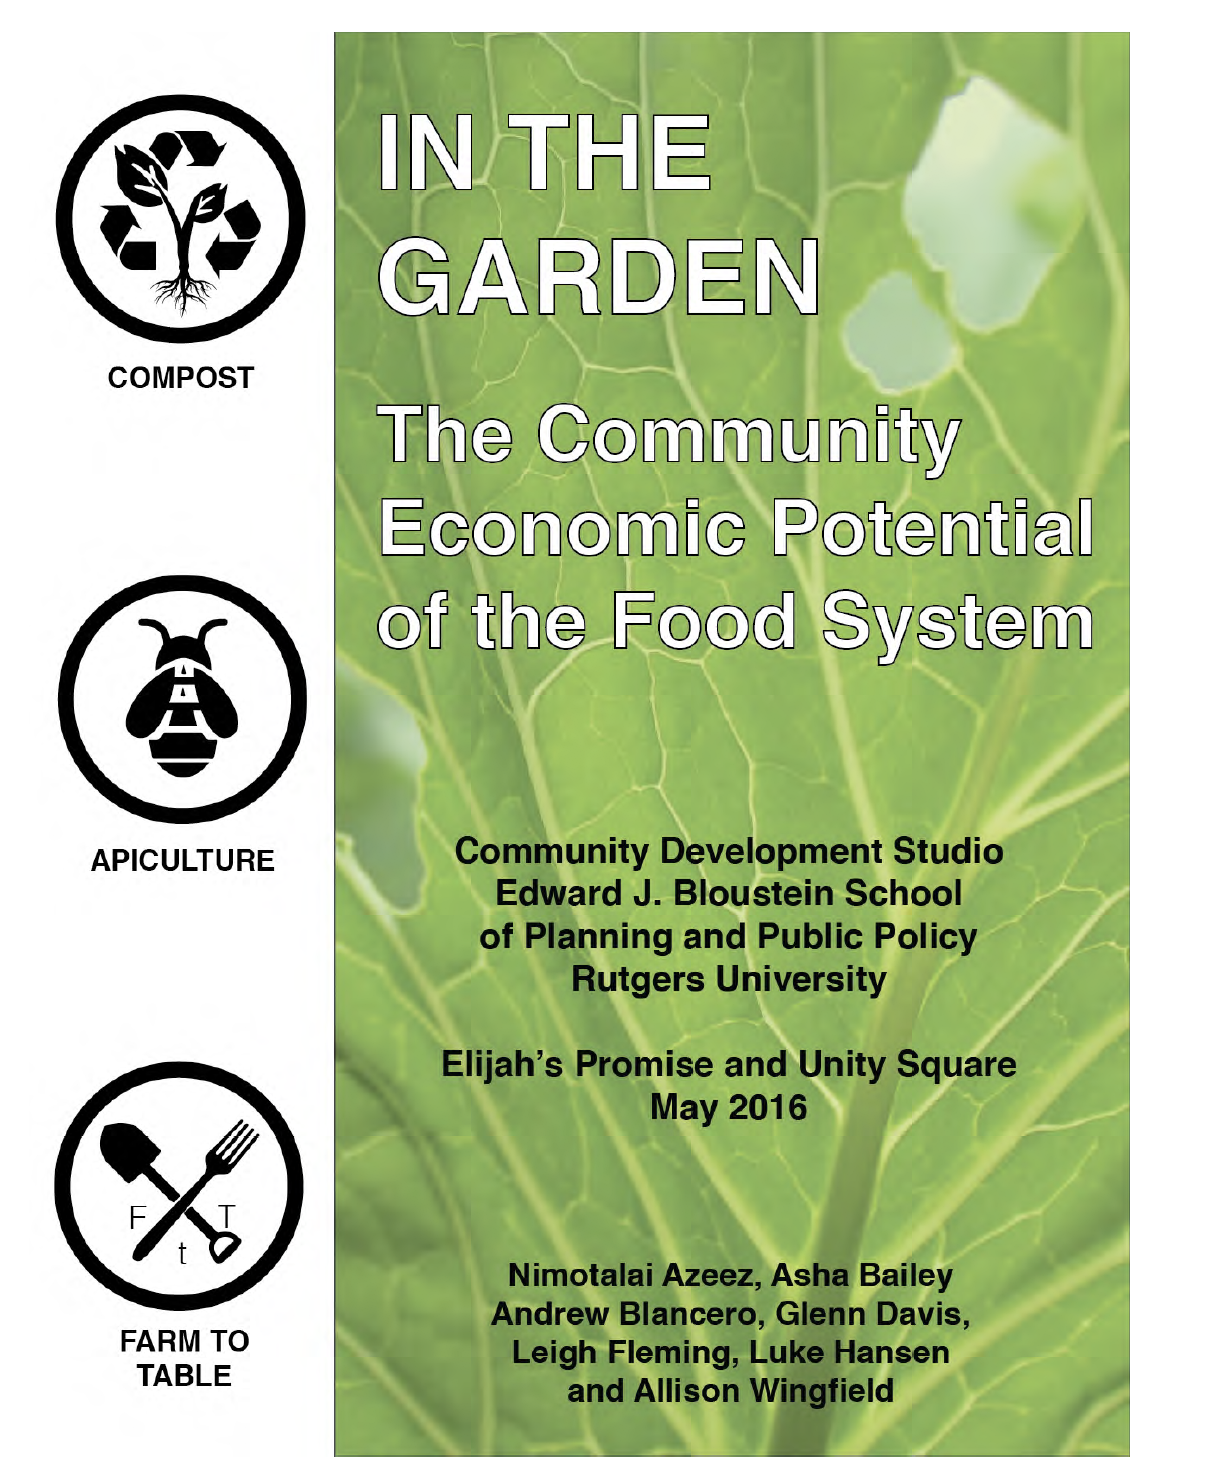 In the Garden -The Community Economic Potential of the Food System